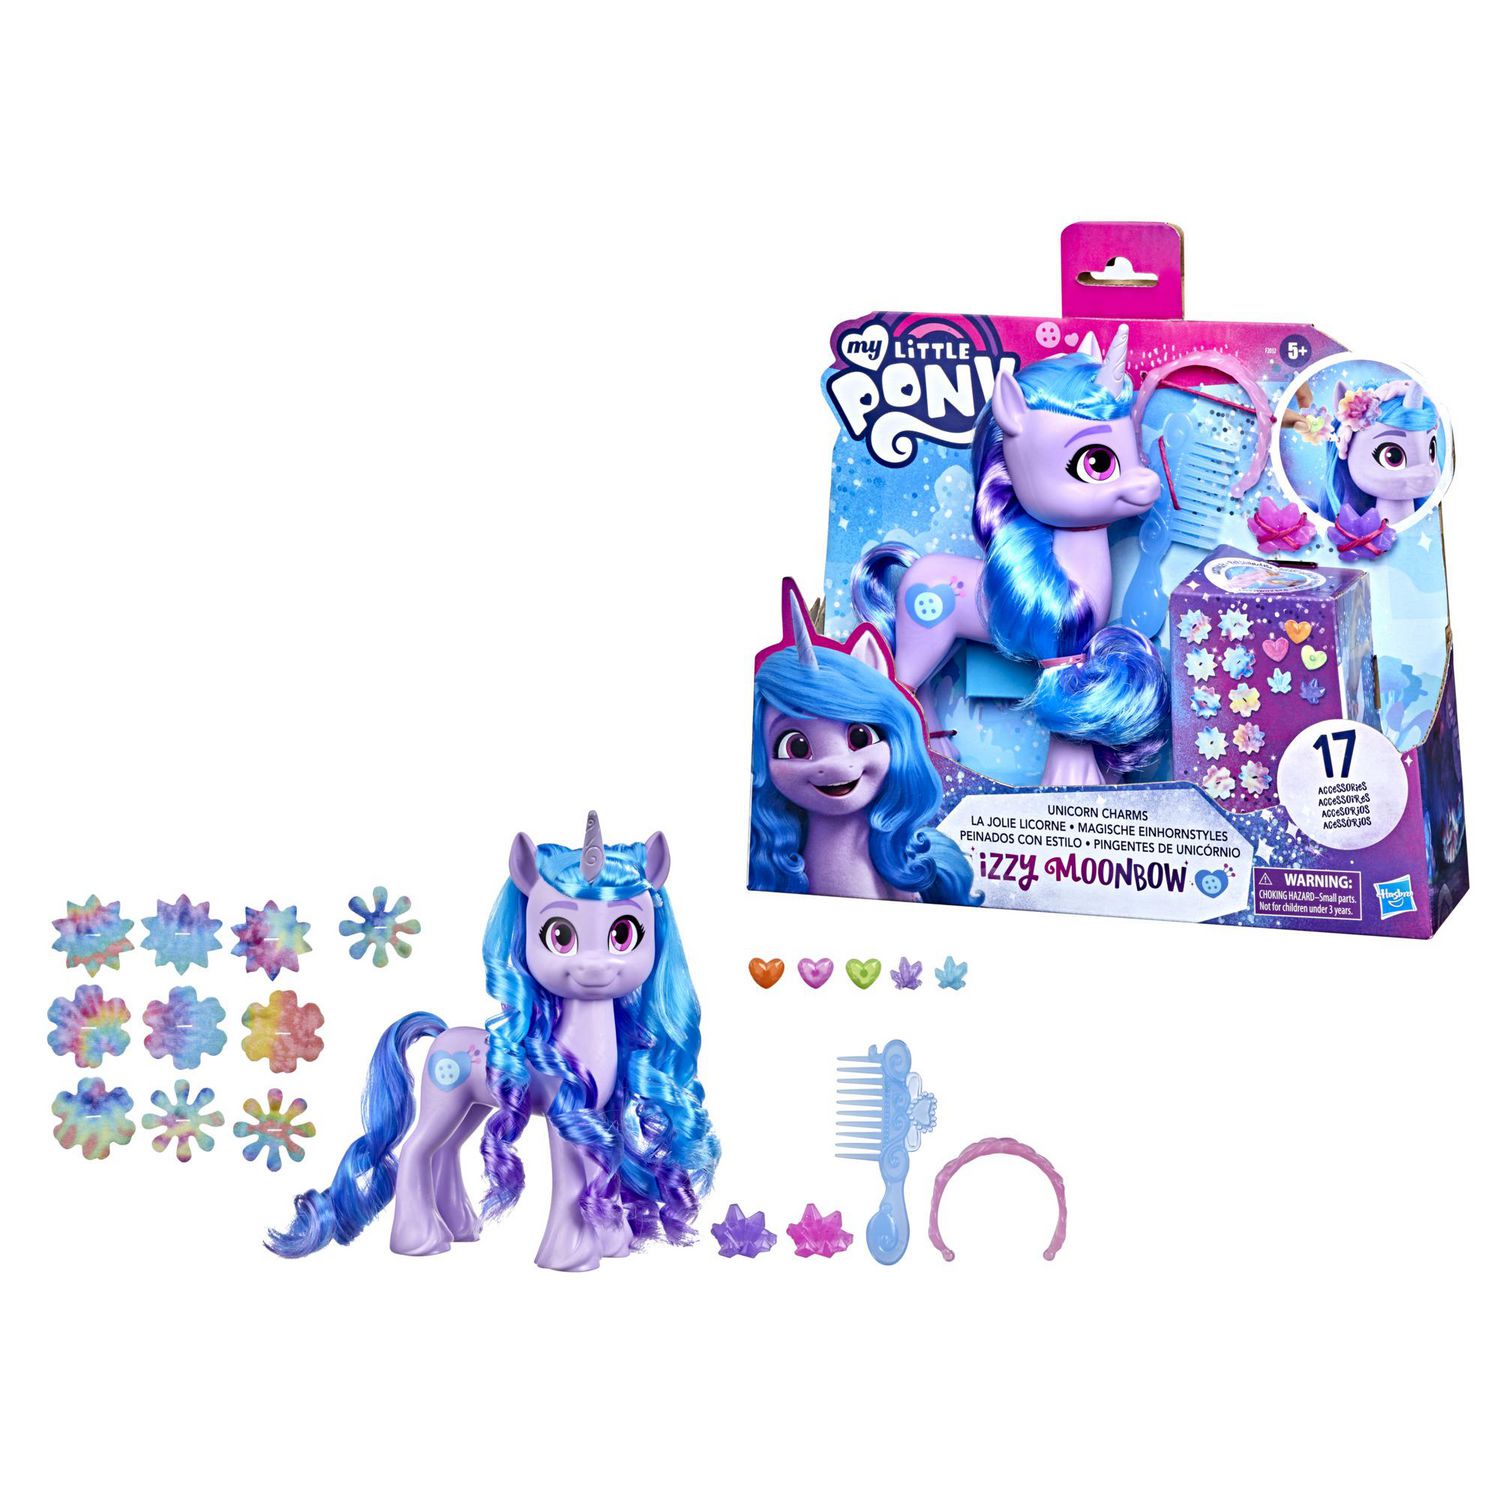 My Little Pony: A New Generation Movie Unicorn Chams Izzy Moonbow Exclusive  Toy - Pony Figure with 17 Hair Accessories, Friendship Bracelet | Walmart  Canada